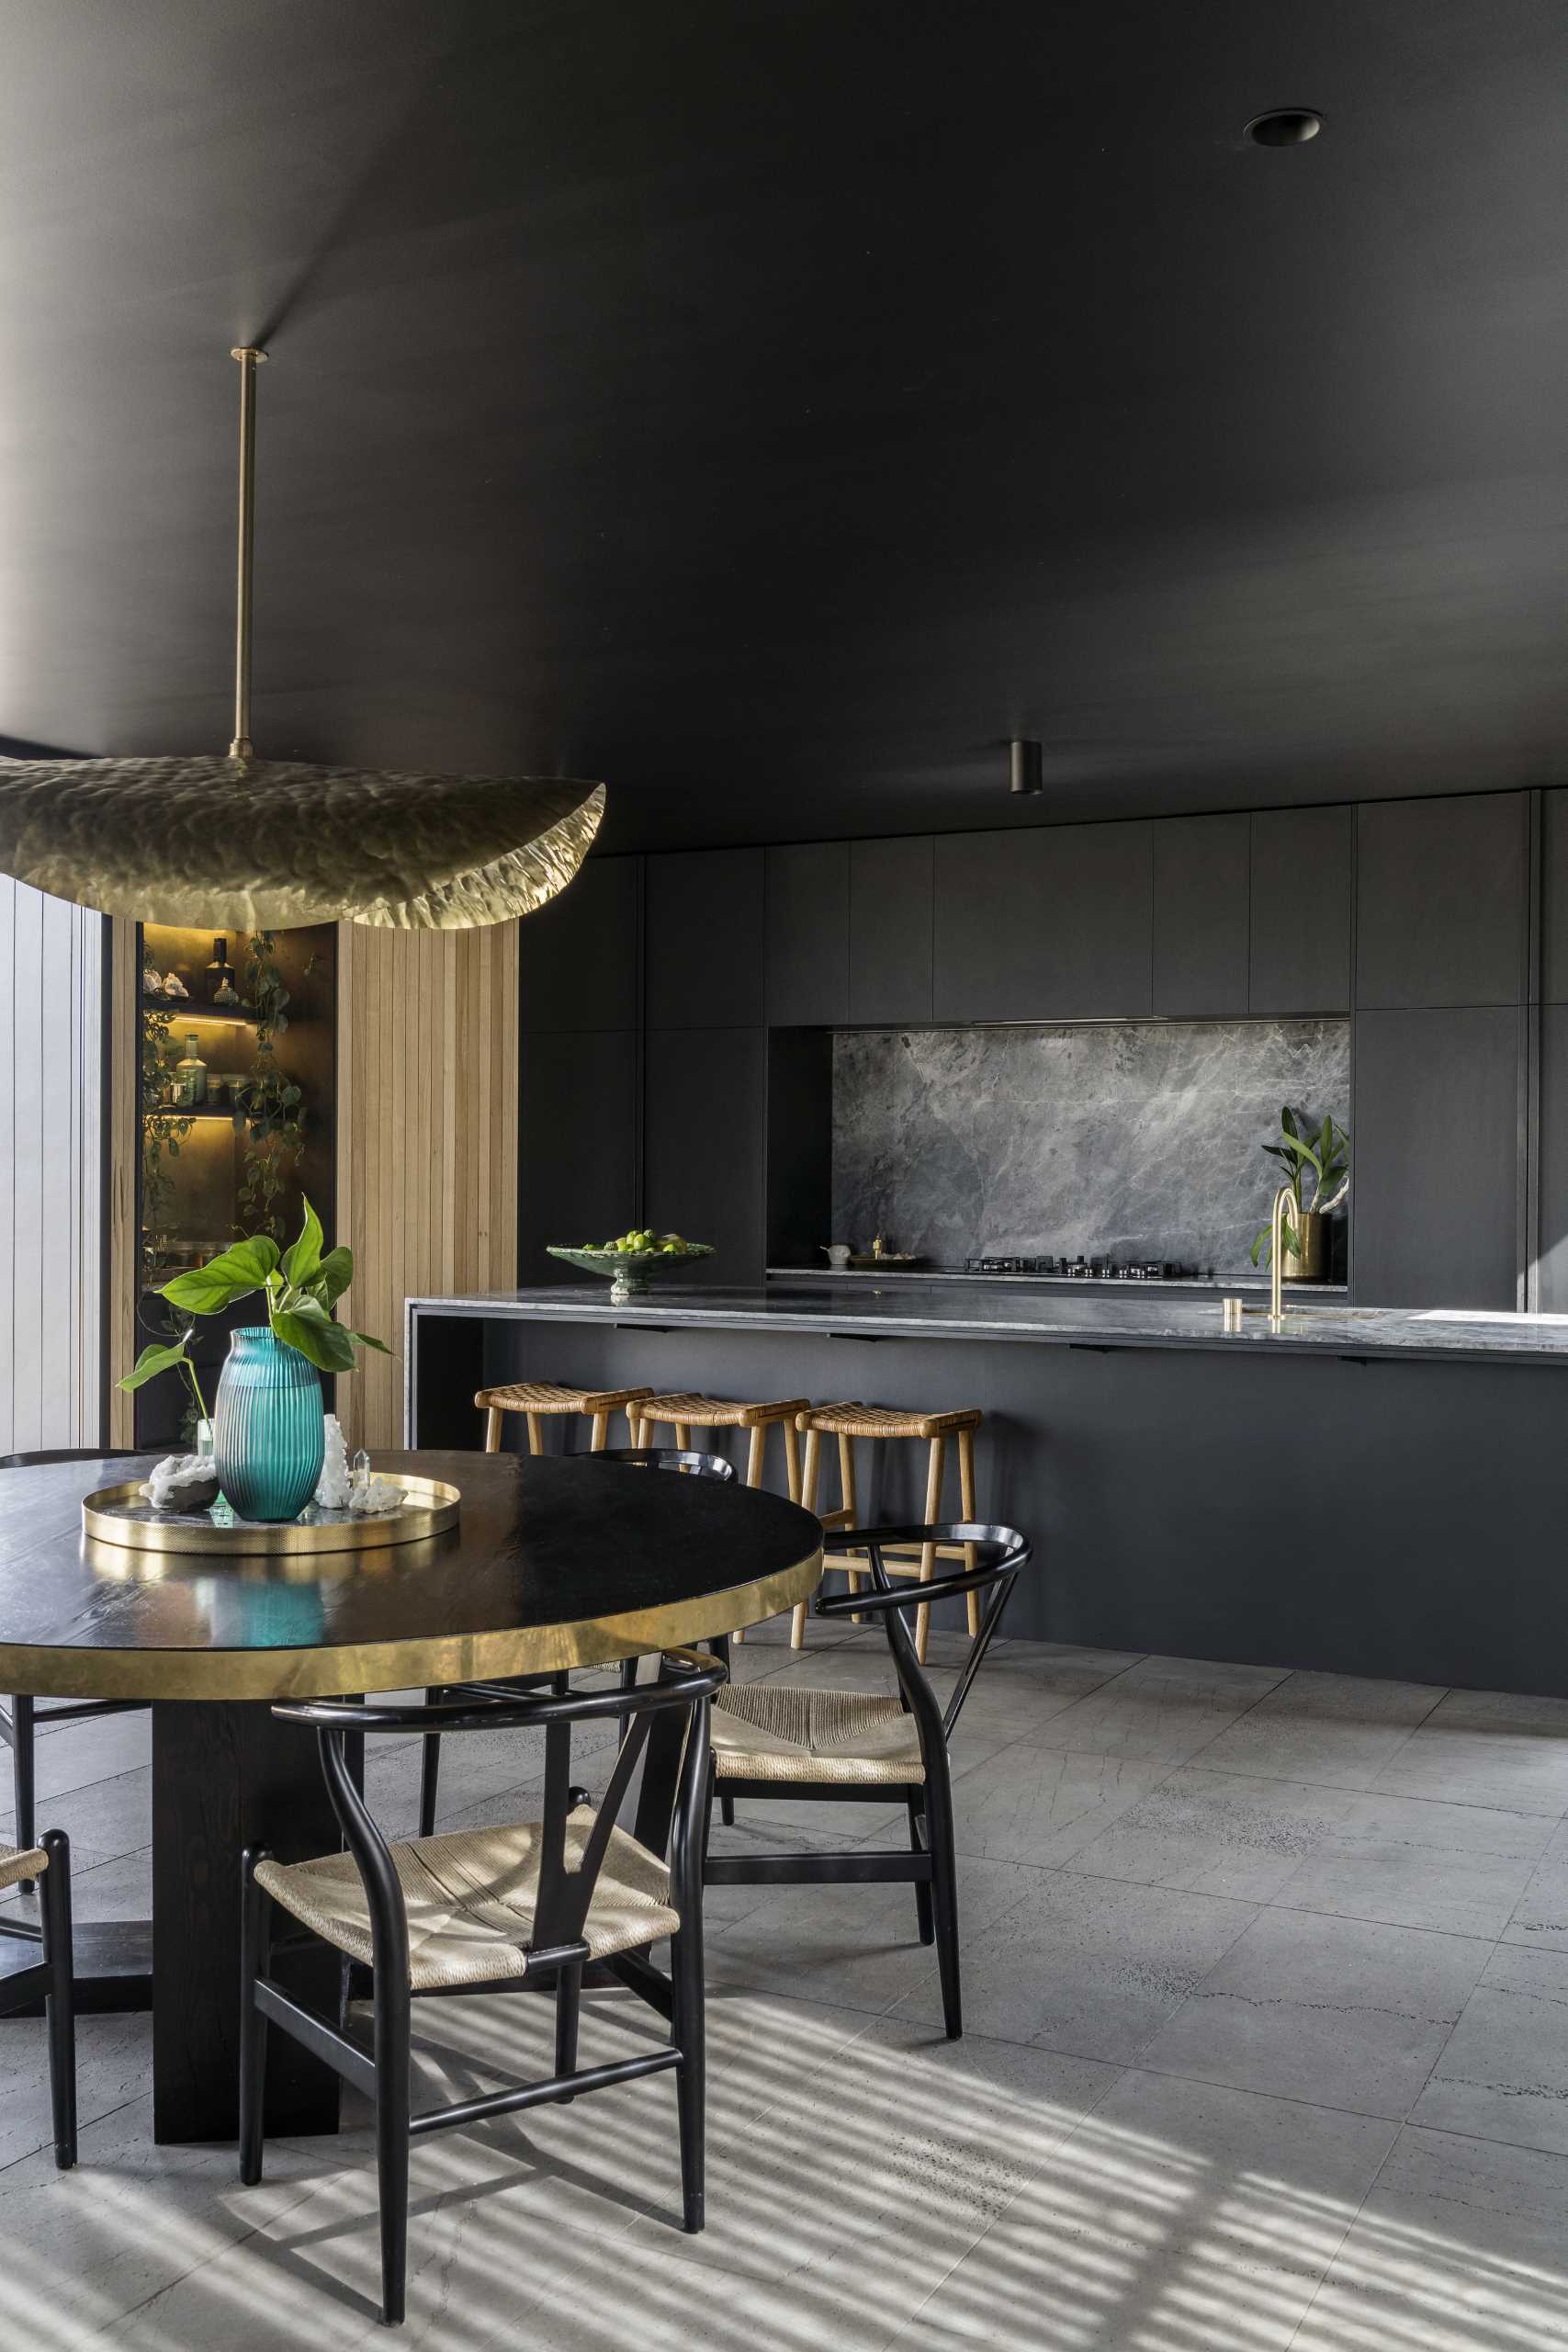 A modern black kitchen with minimalist cabinets, brass accents, and a long island.